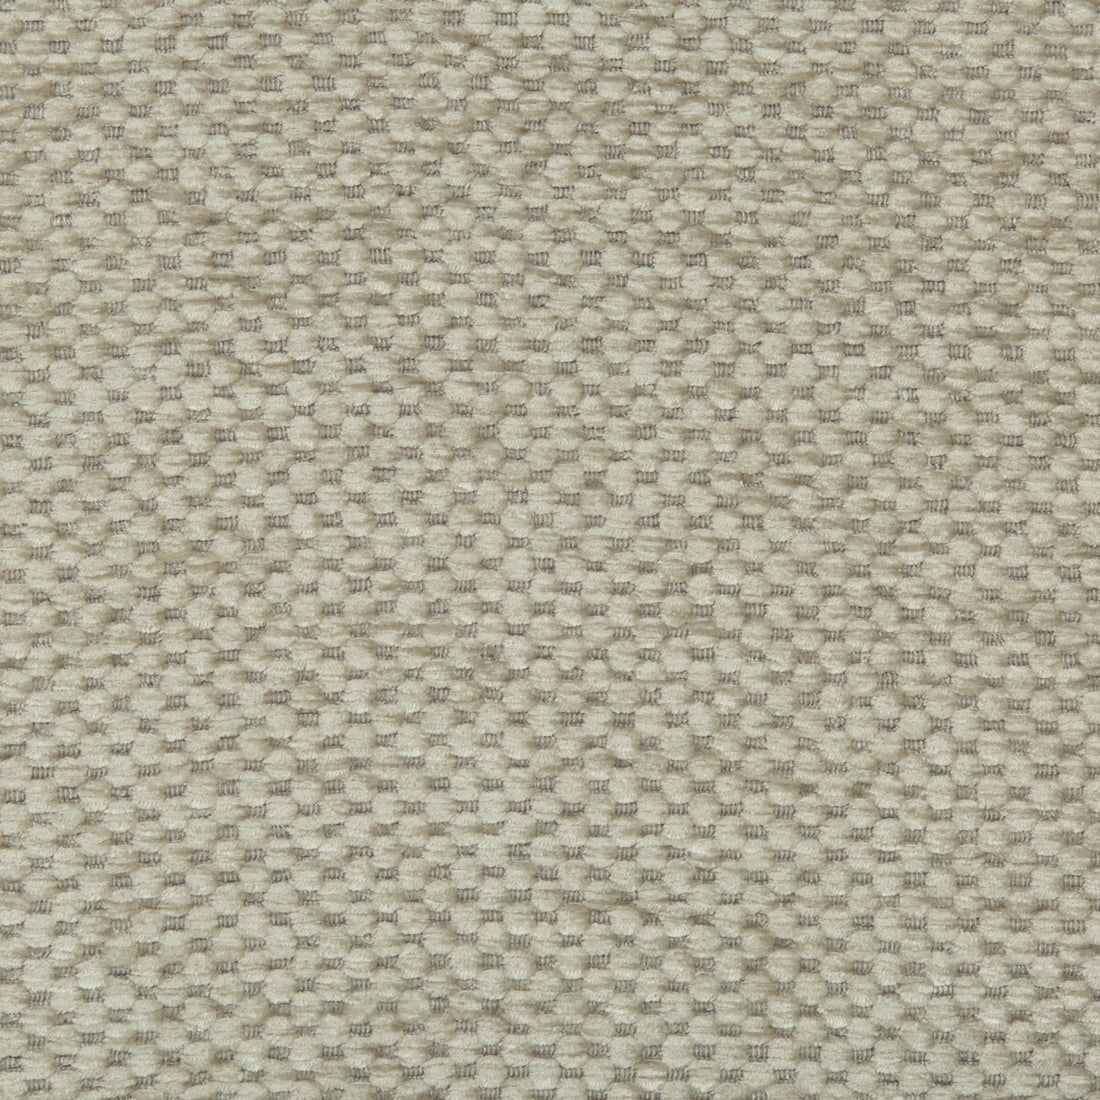 Kravet Contract fabric in 35134-11 color - pattern 35134.11.0 - by Kravet Contract in the Incase Crypton Gis collection